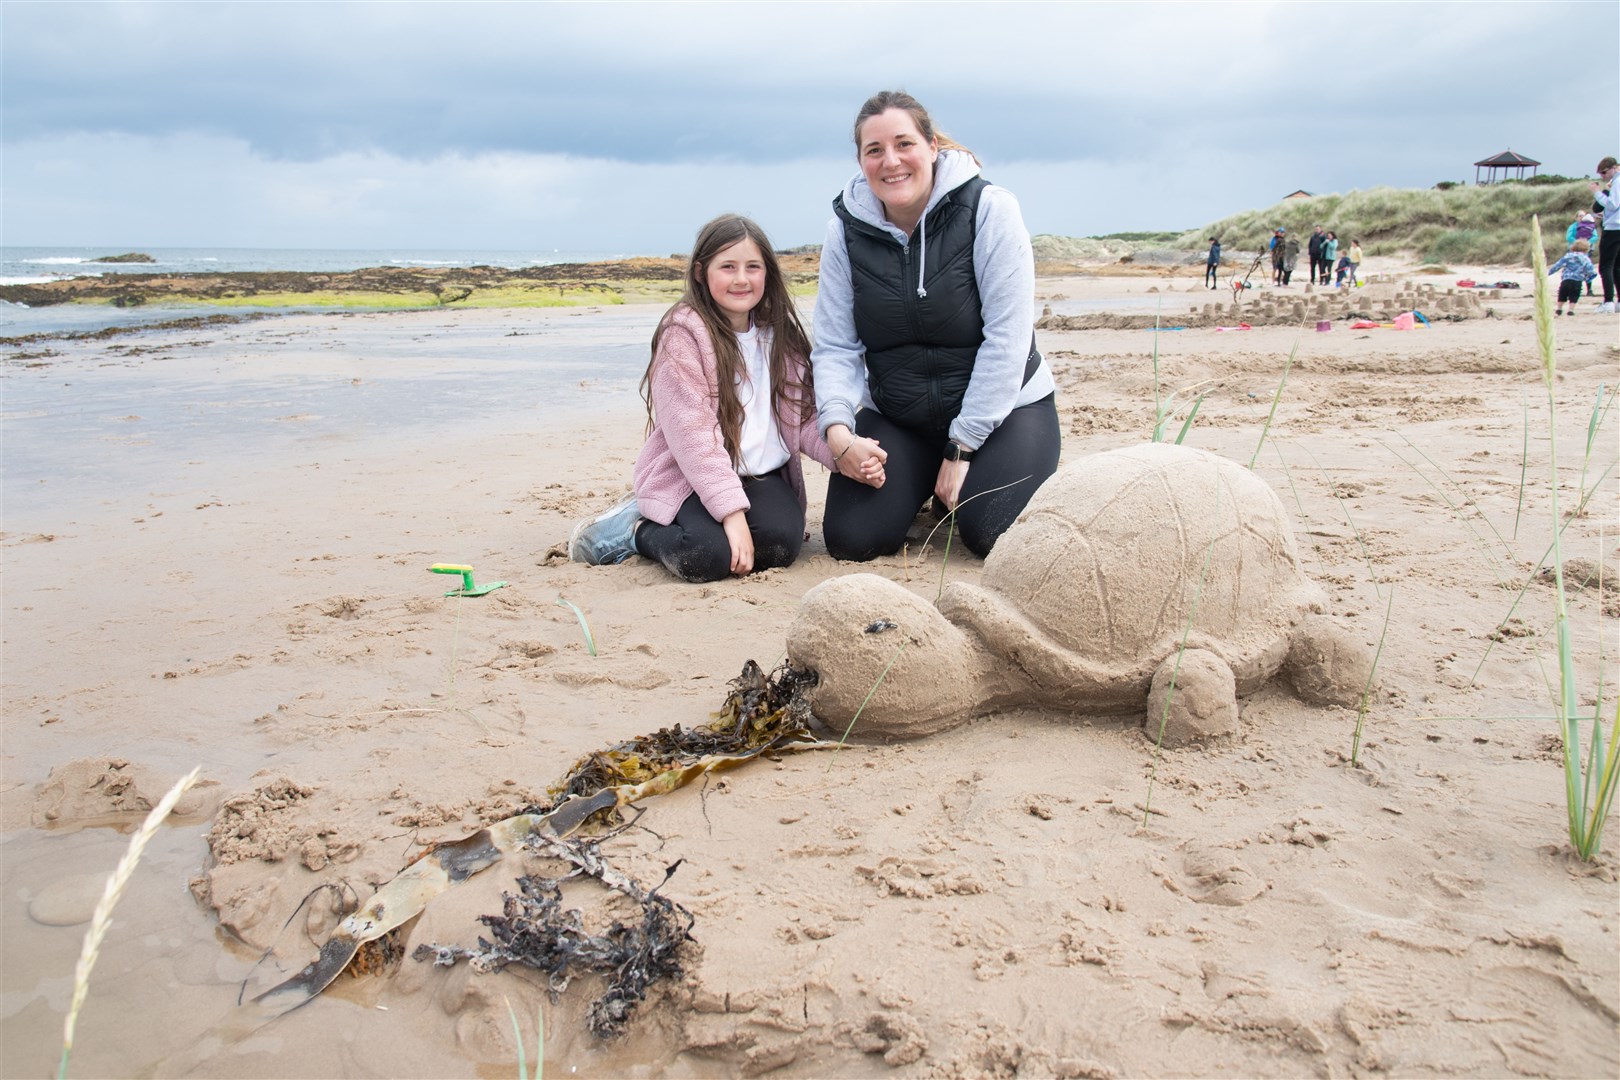 Camille and Fleur Stewart designed a turtle for their entry into the competition. Picture: Daniel Forsyth